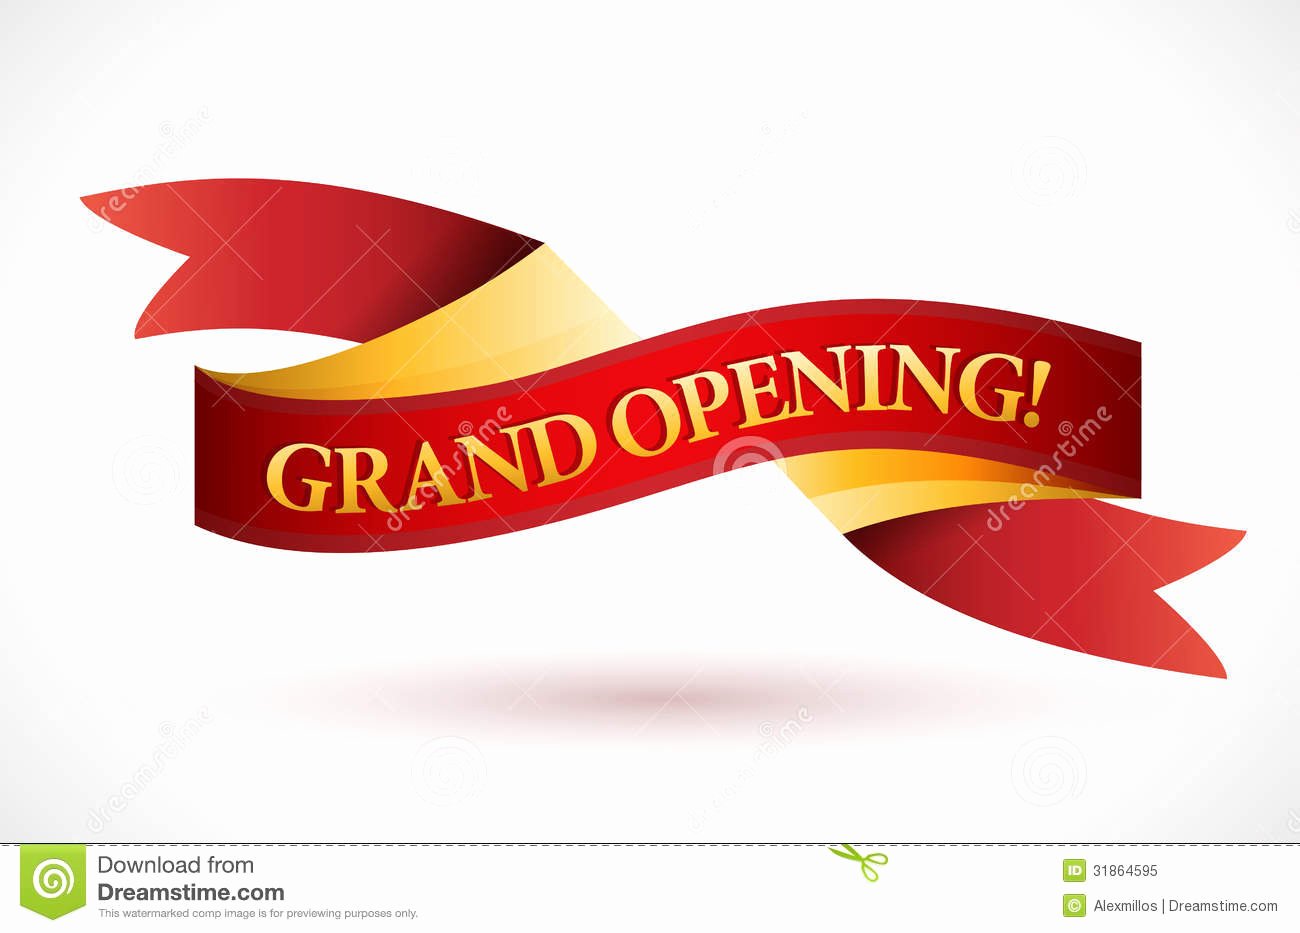 Grand Opening Invitation Template Free Inspirational Grand Opening Invitation Templates